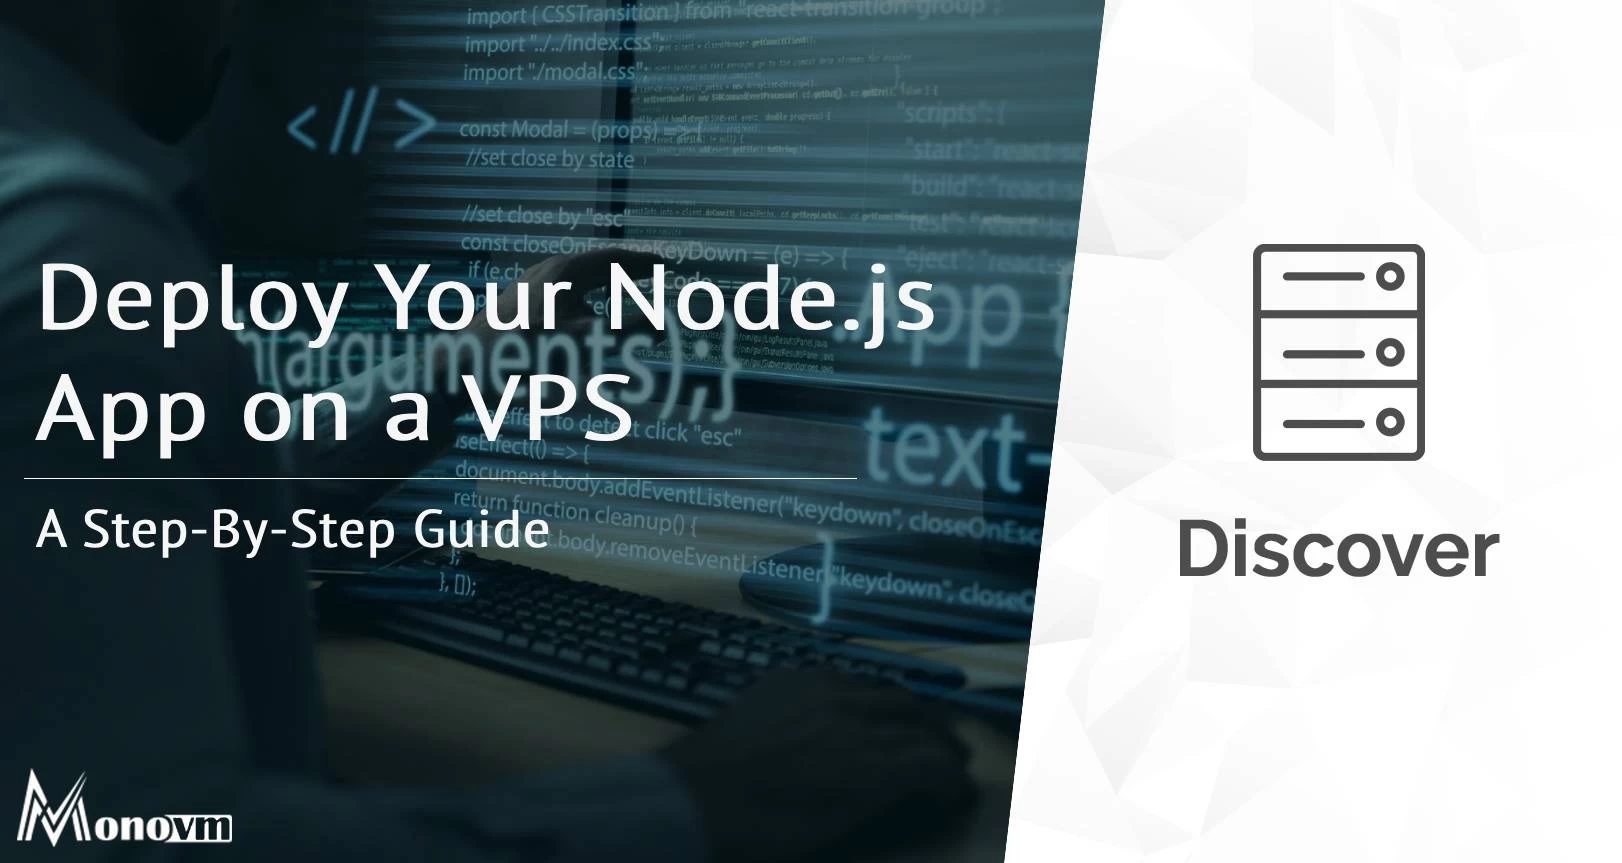 Deploy Your Node.js Application on a VPS: A Step-By-Step Guide